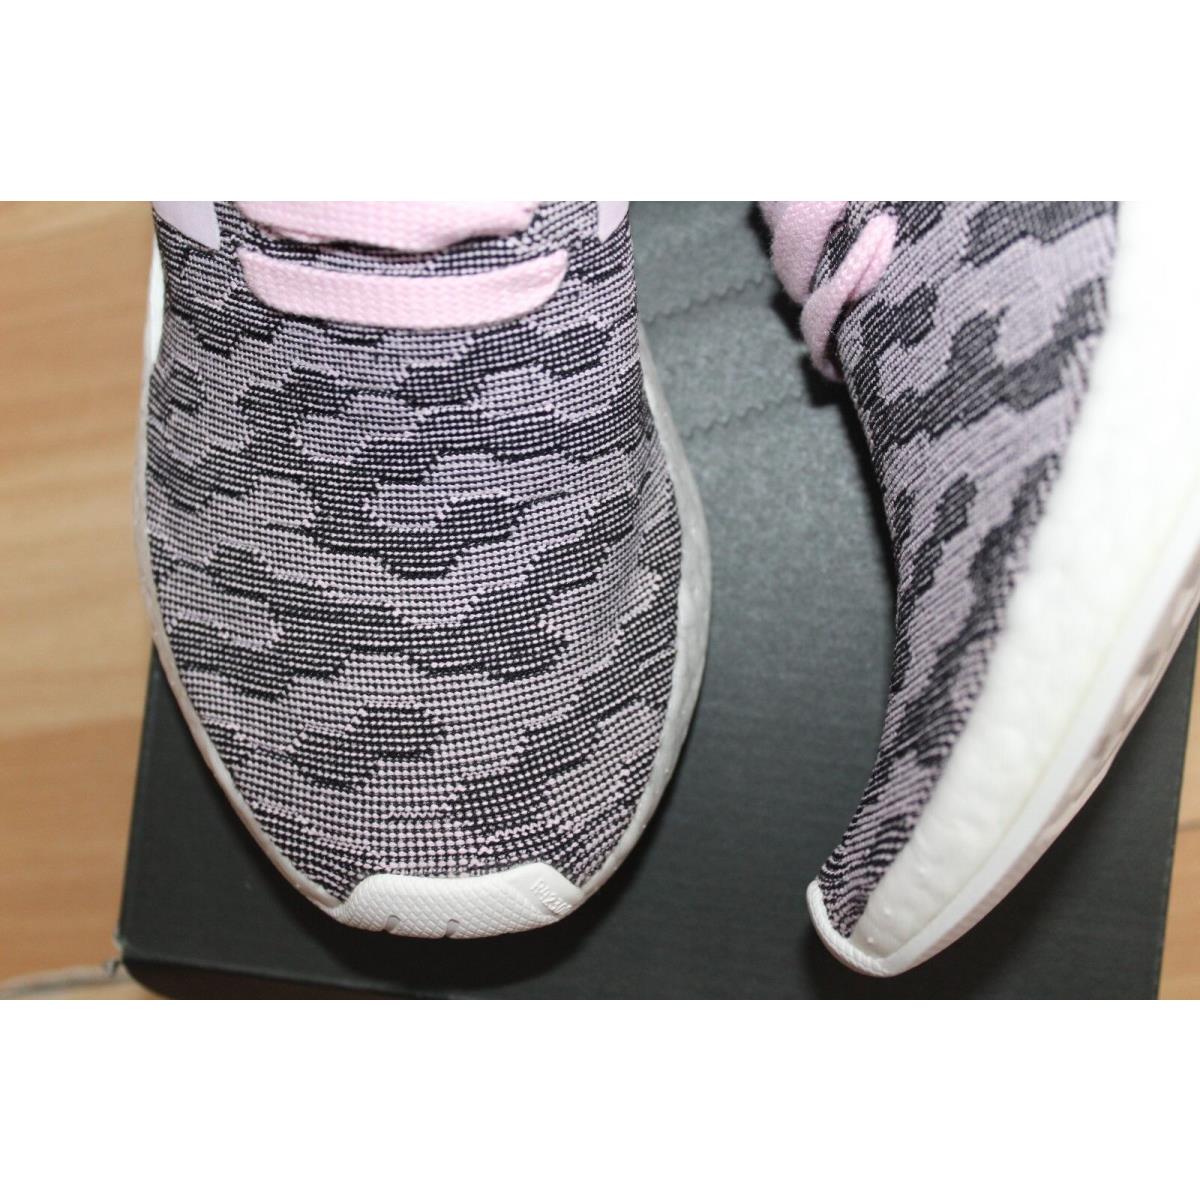 Adidas shoes NMD - PINK 5